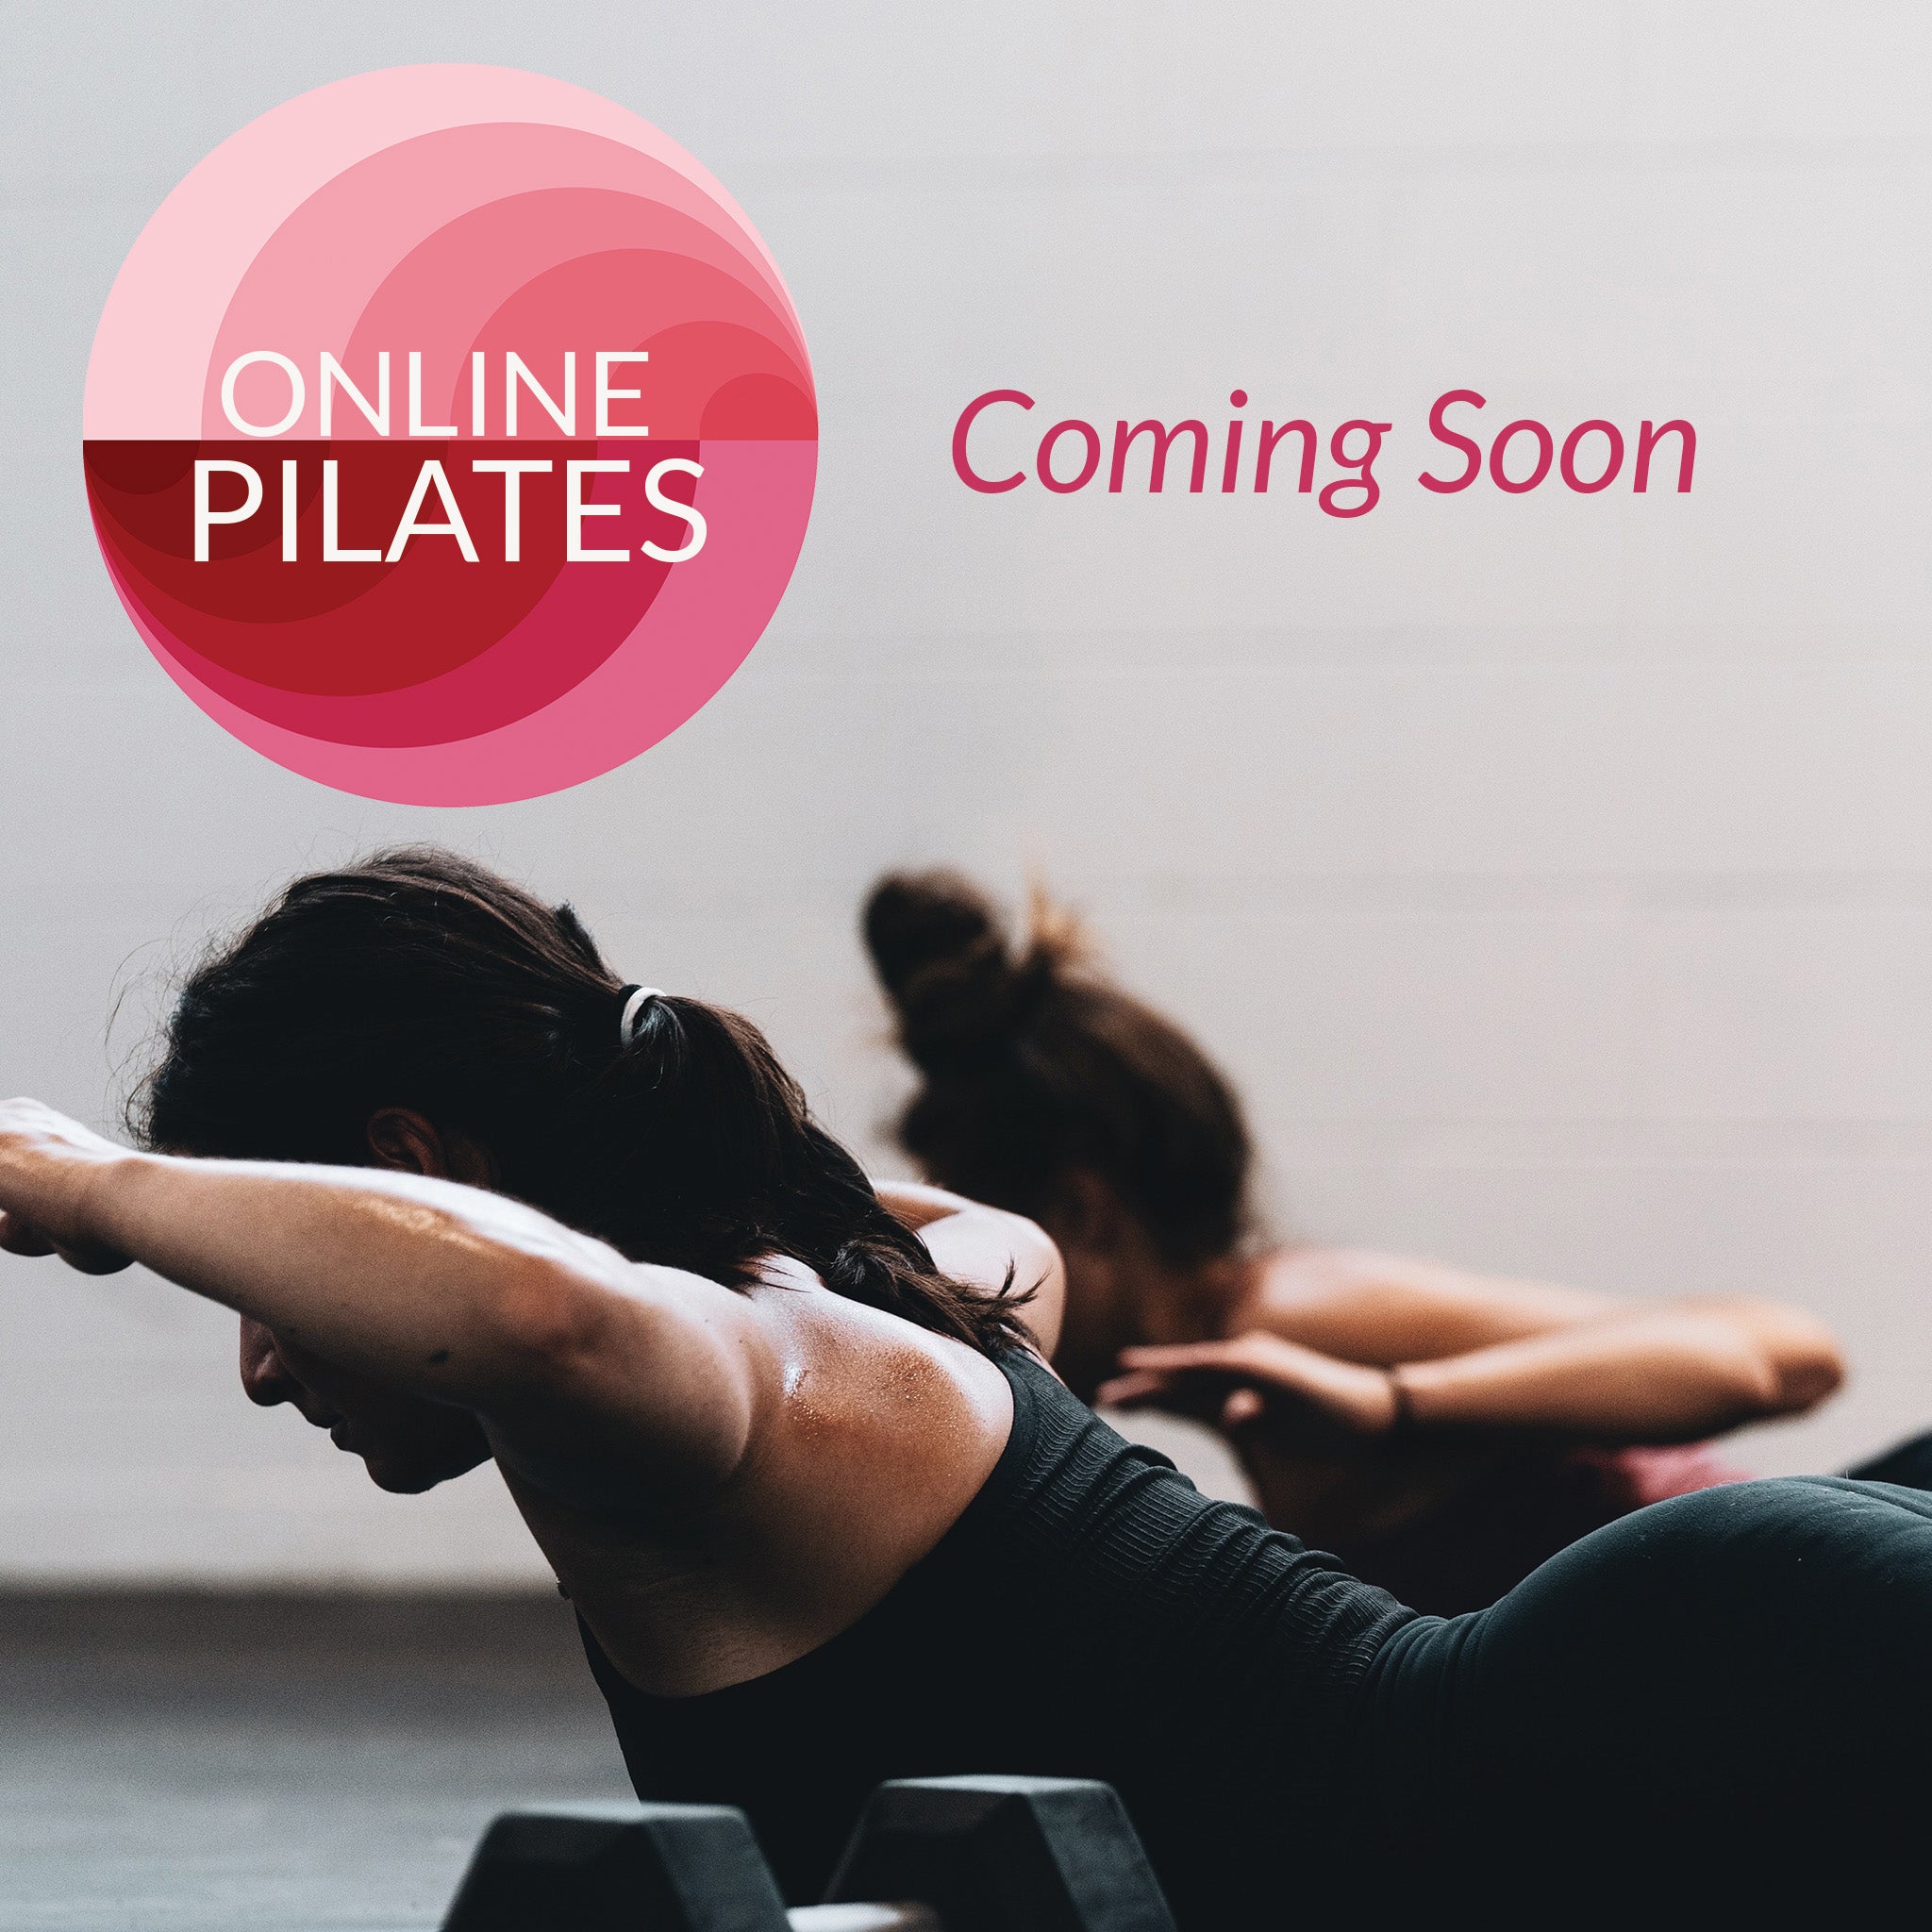 Online Pilates - Midst 6 sessions